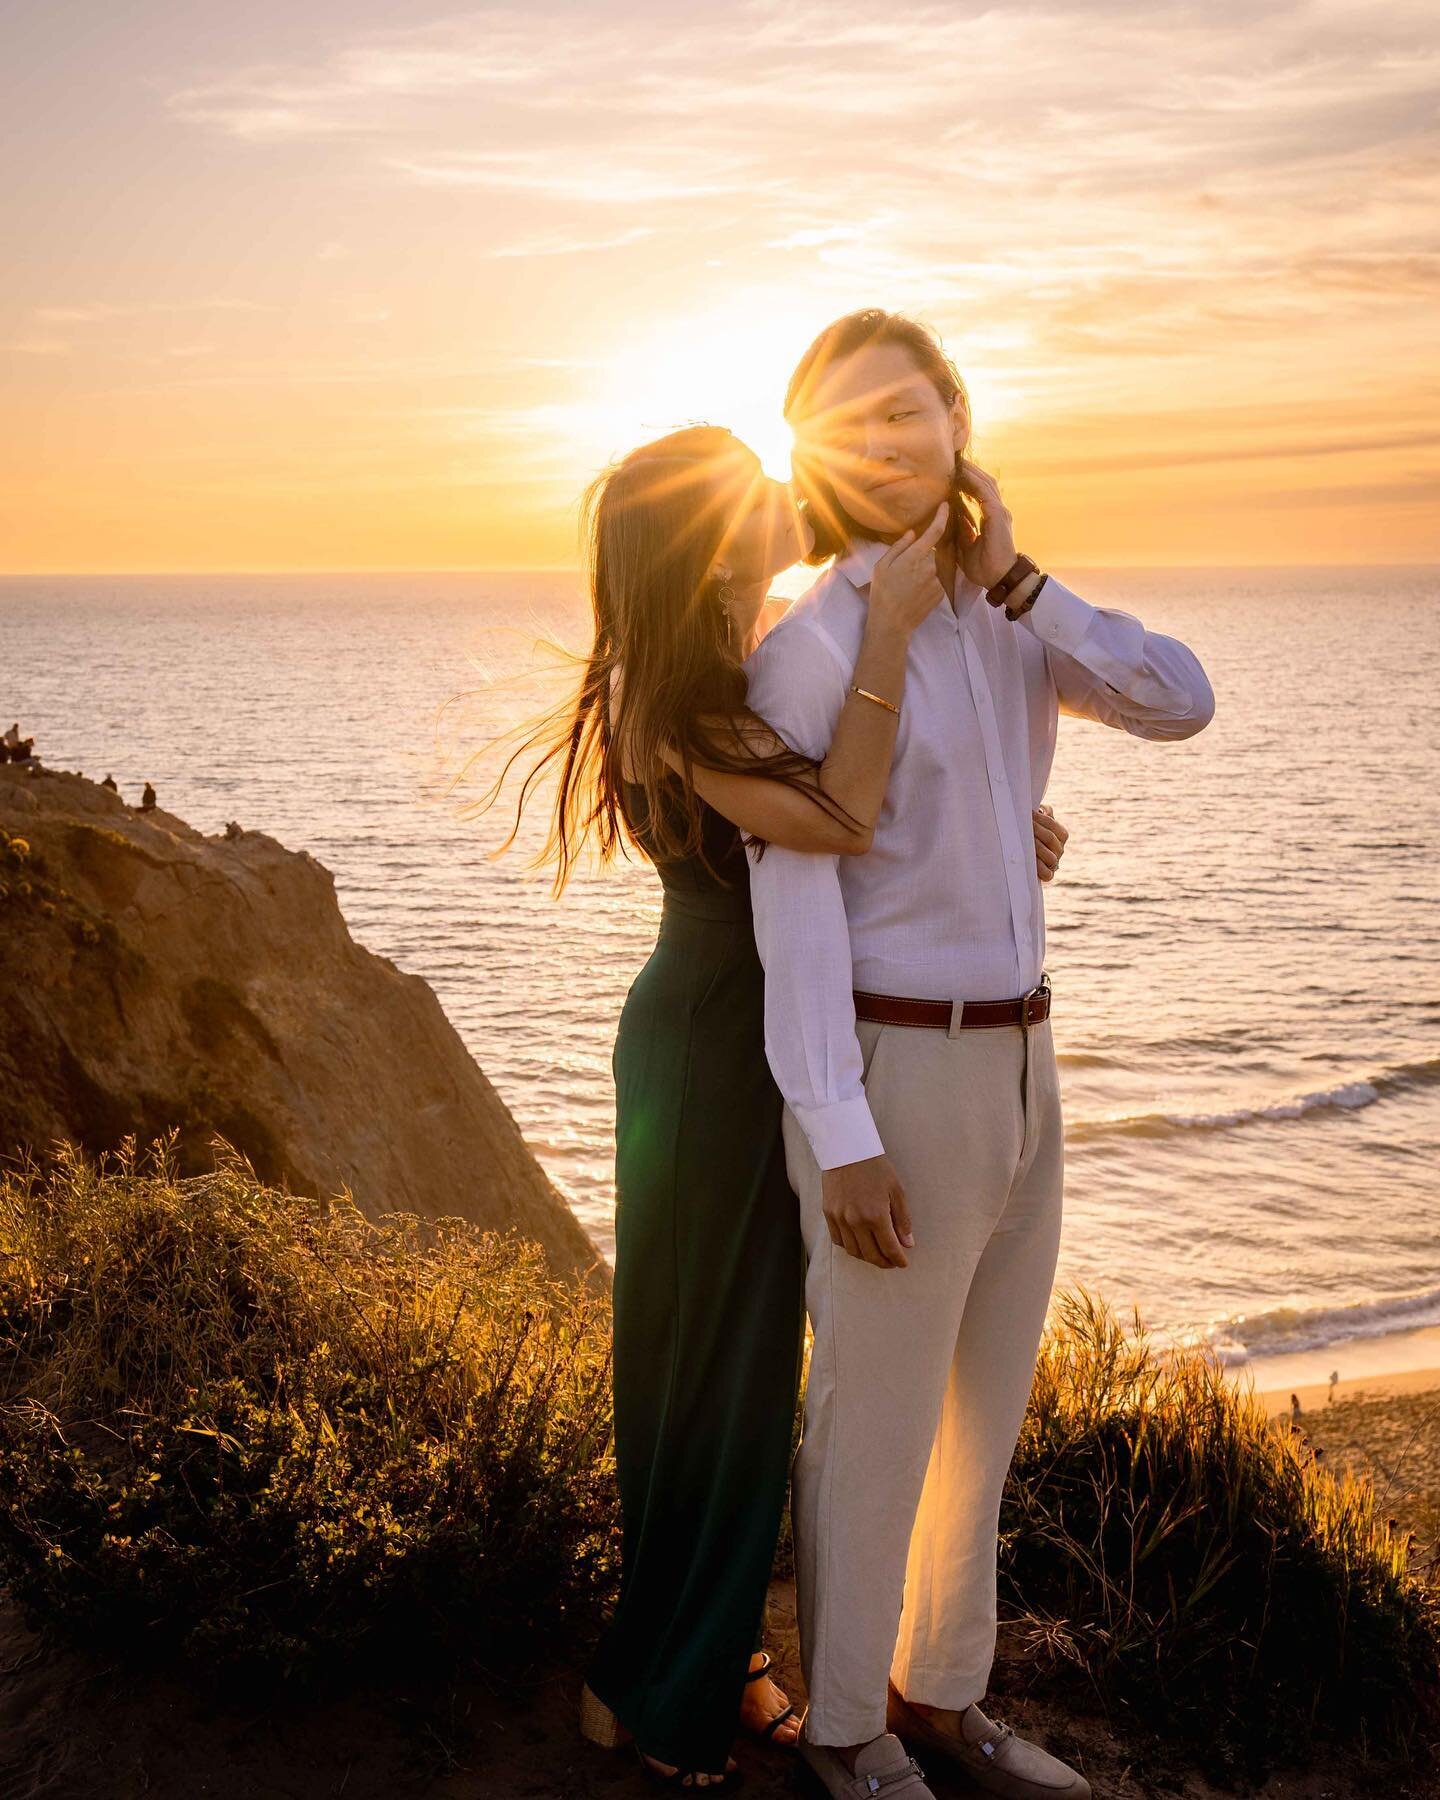 Hello from sunny California ☀️

Back home for a quick breather between my Cali trip and my upcoming Europe / Morocco trip. I visited San Fran and Los Angeles and it was amazing!! Especially thrilled that I got to capture engagement photos for two of 